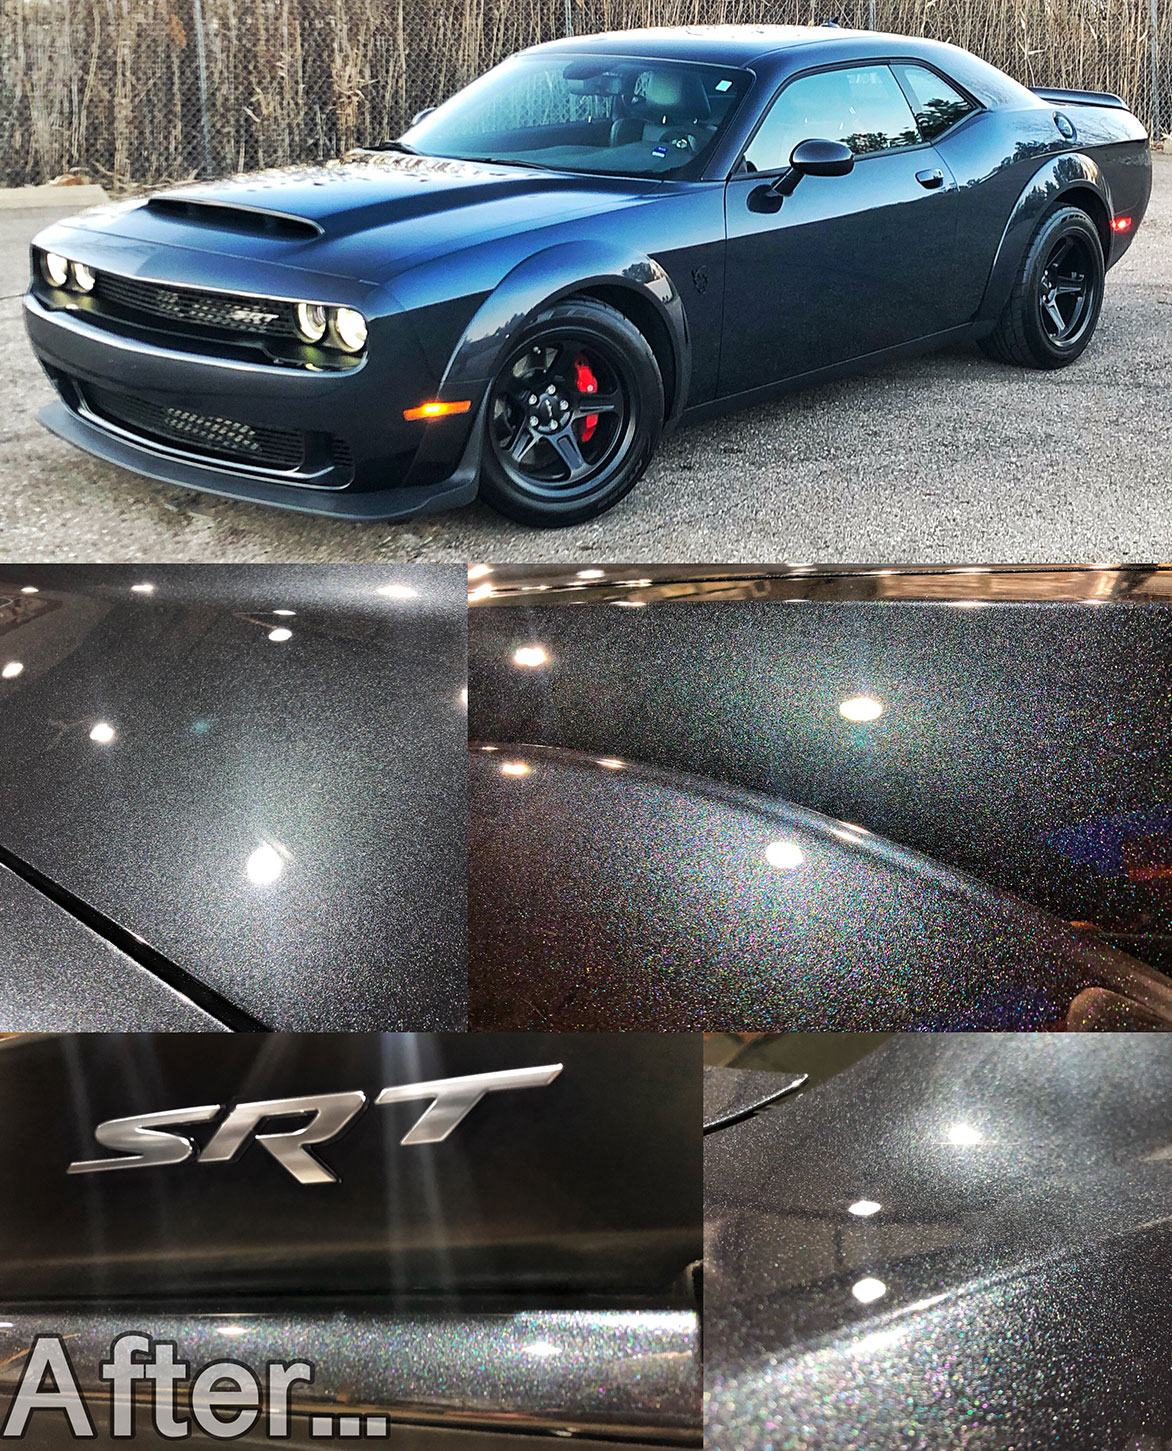 My Dodge Challenger SRT® Demon getting a much-needed spring cleaning from Marc Harris at Detroit Detailing.